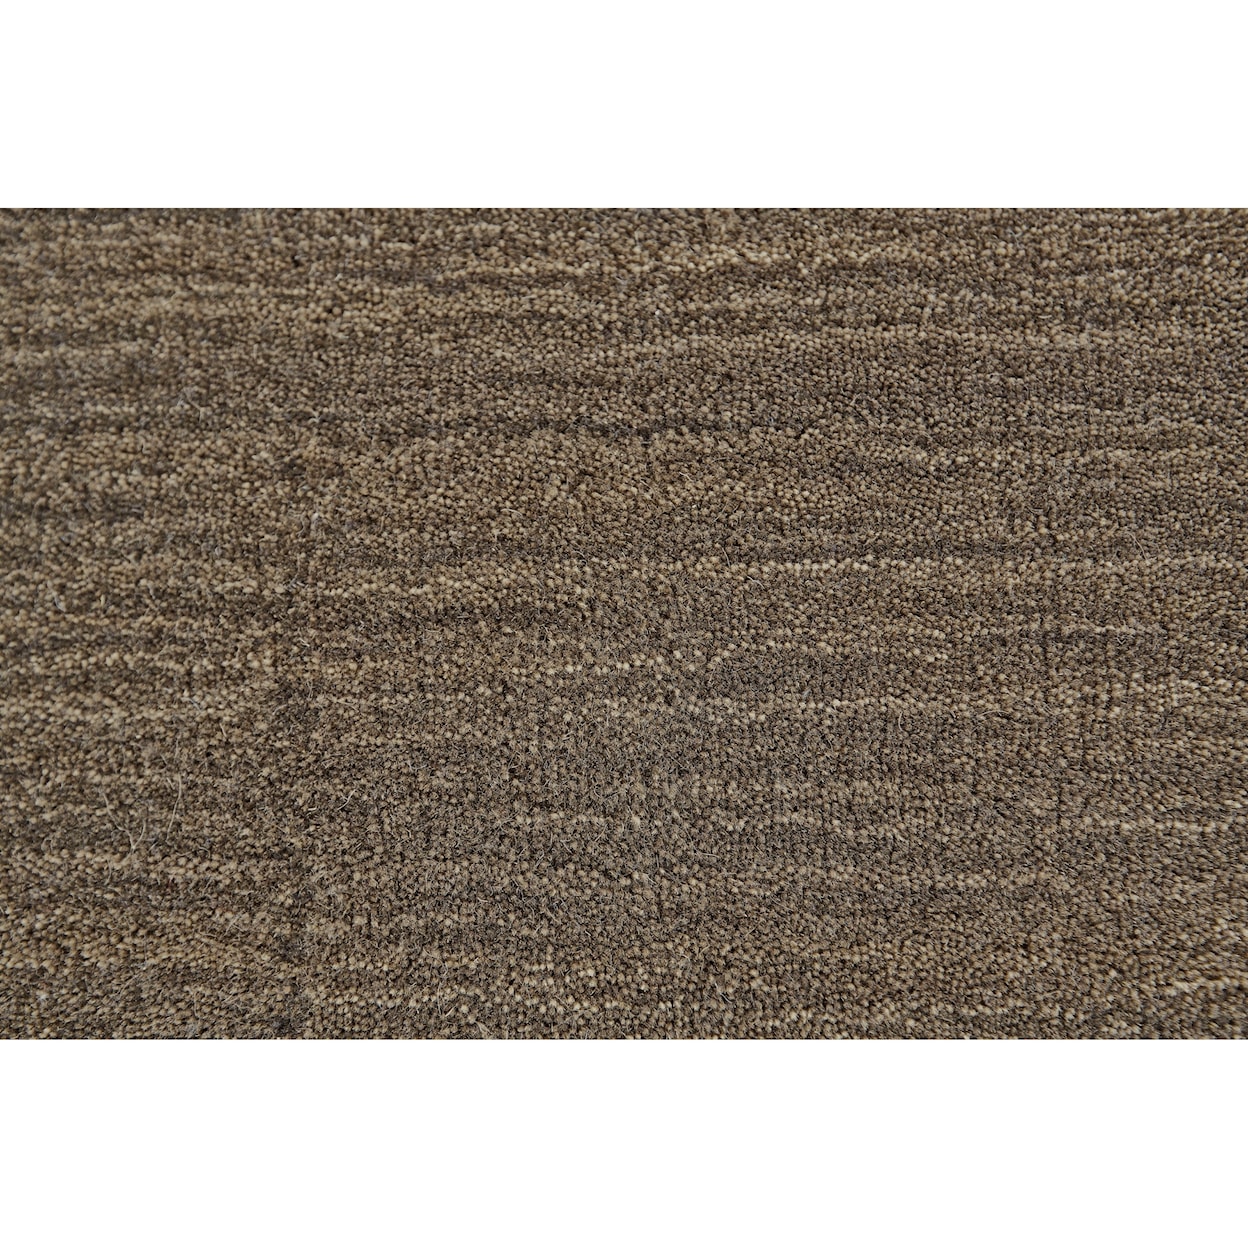 Feizy Rugs Luna Brown 5' x 8' Area Rug